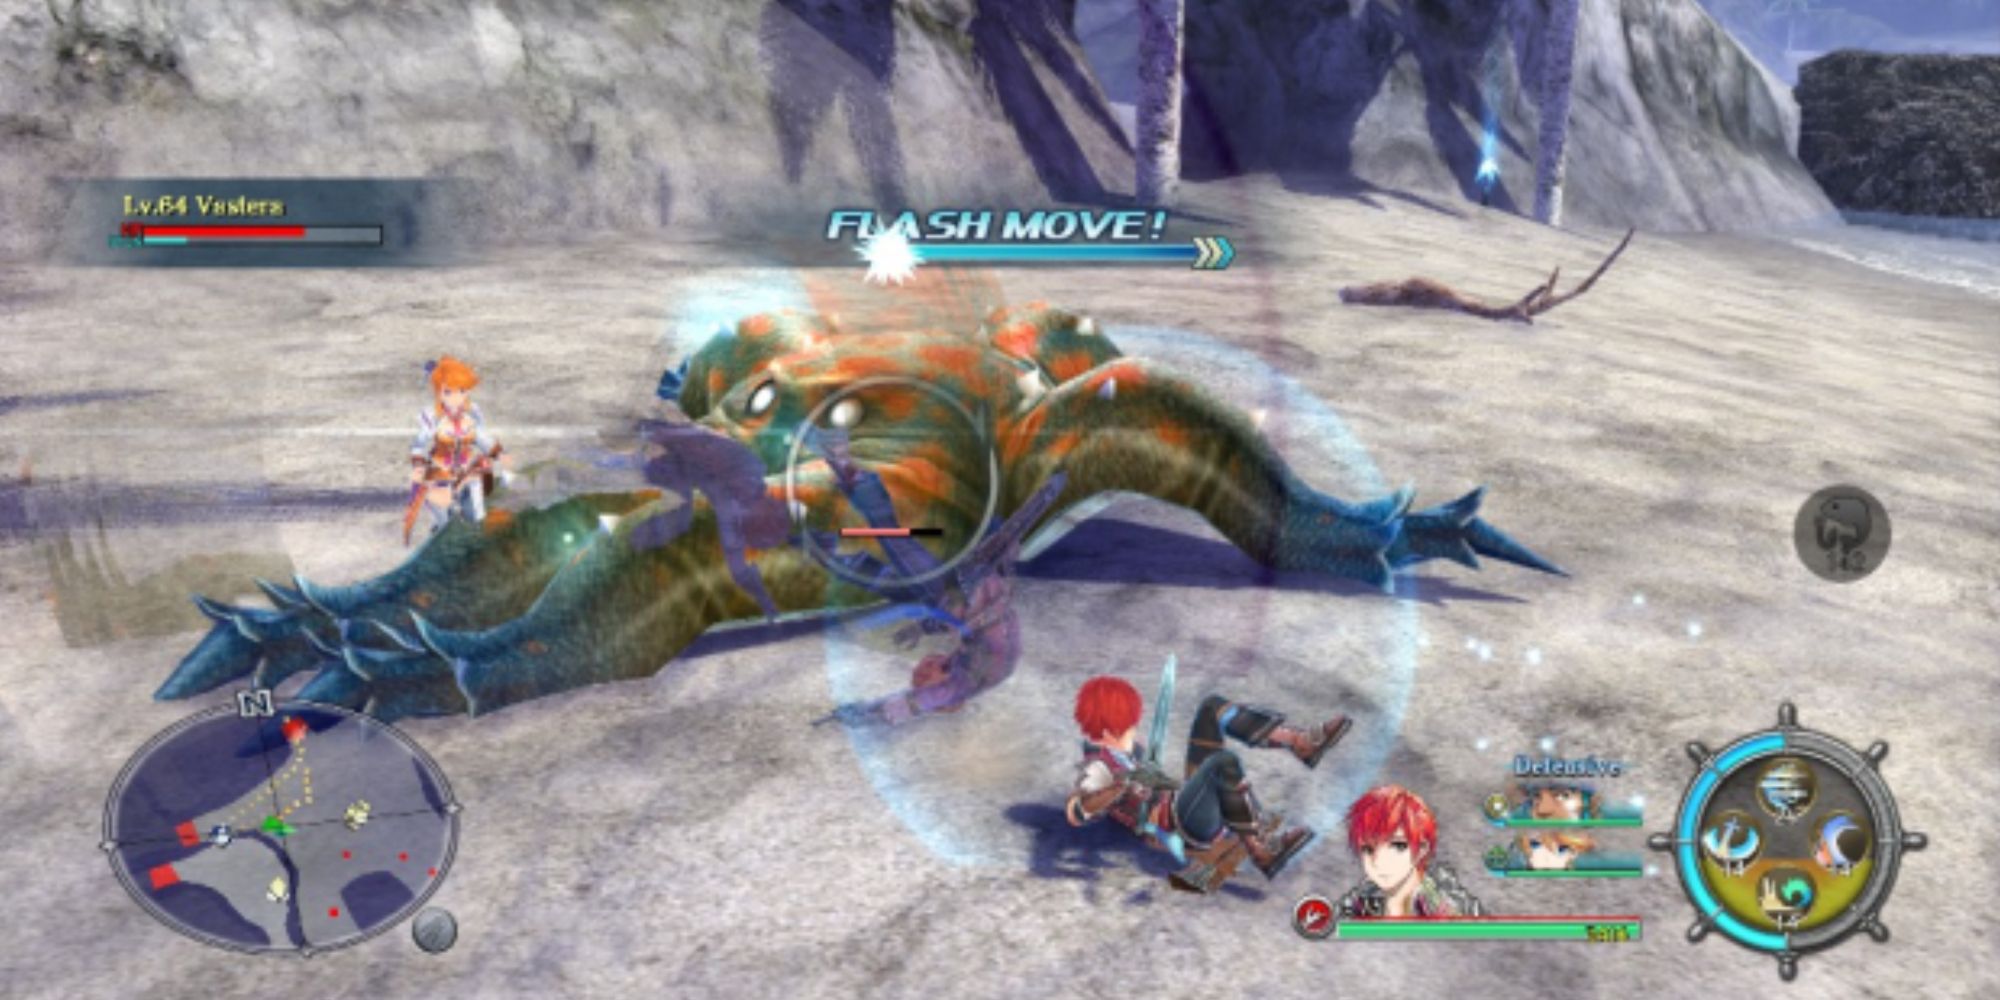 Adol performing a Flash Move in Ys VIII: Lacrimosa of DANA